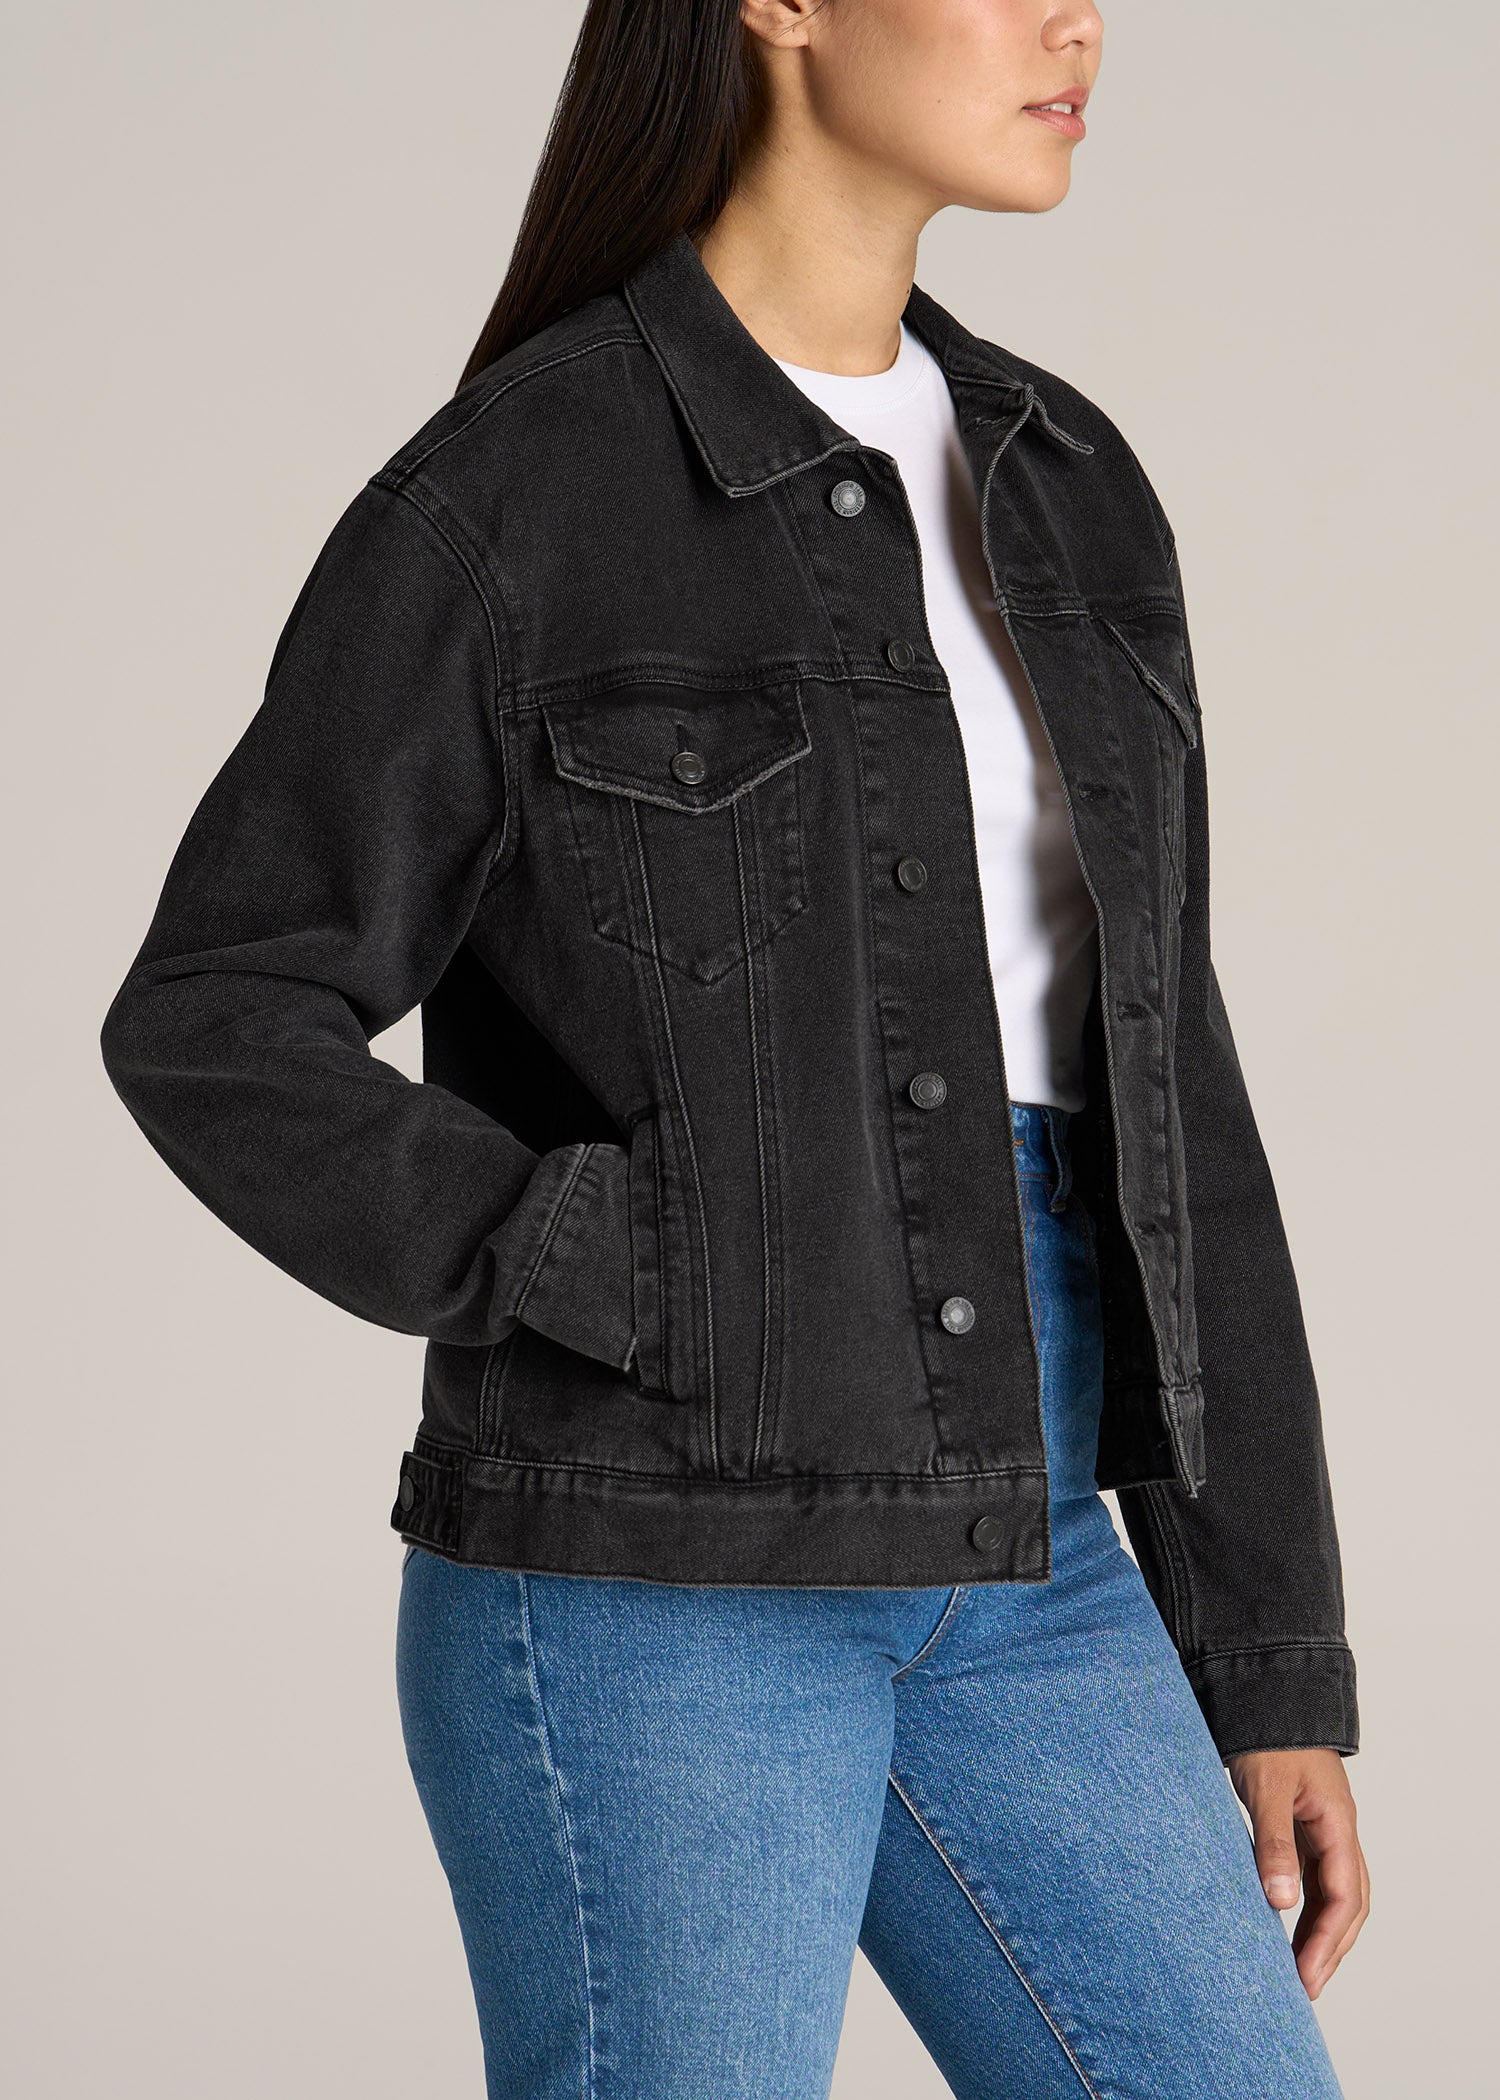 Women's Casual Style // denim jeans jacket, black jeans, t-shirt, sneakers  | Casual summer outfits for women, Casual winter outfits, Fall outfits